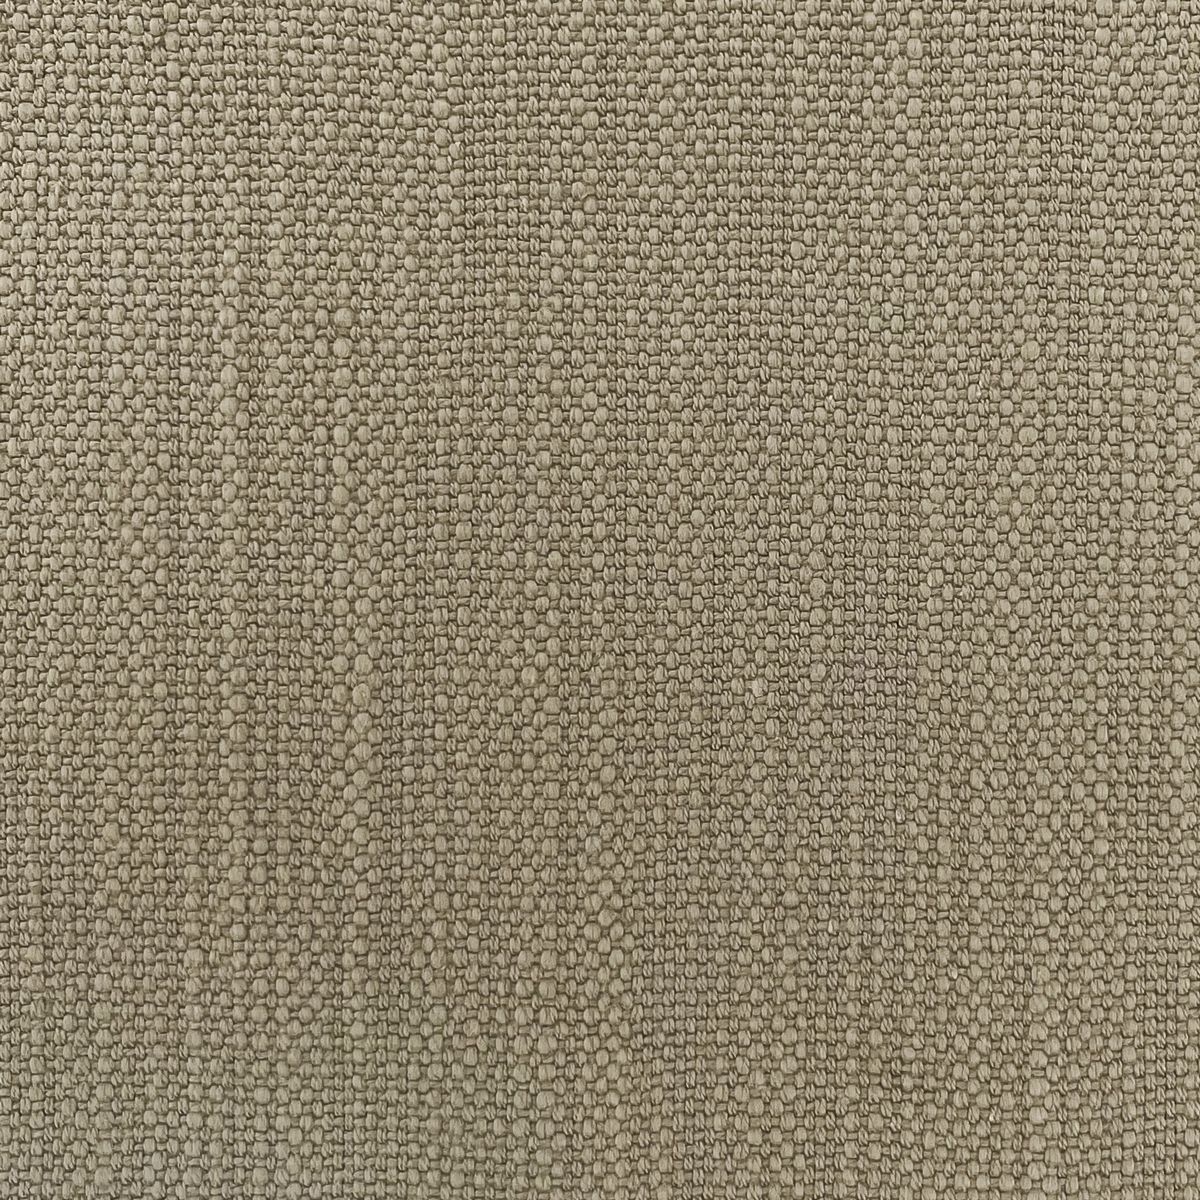 Pimlico Plaza Taupe Fabric by Chatham Glyn